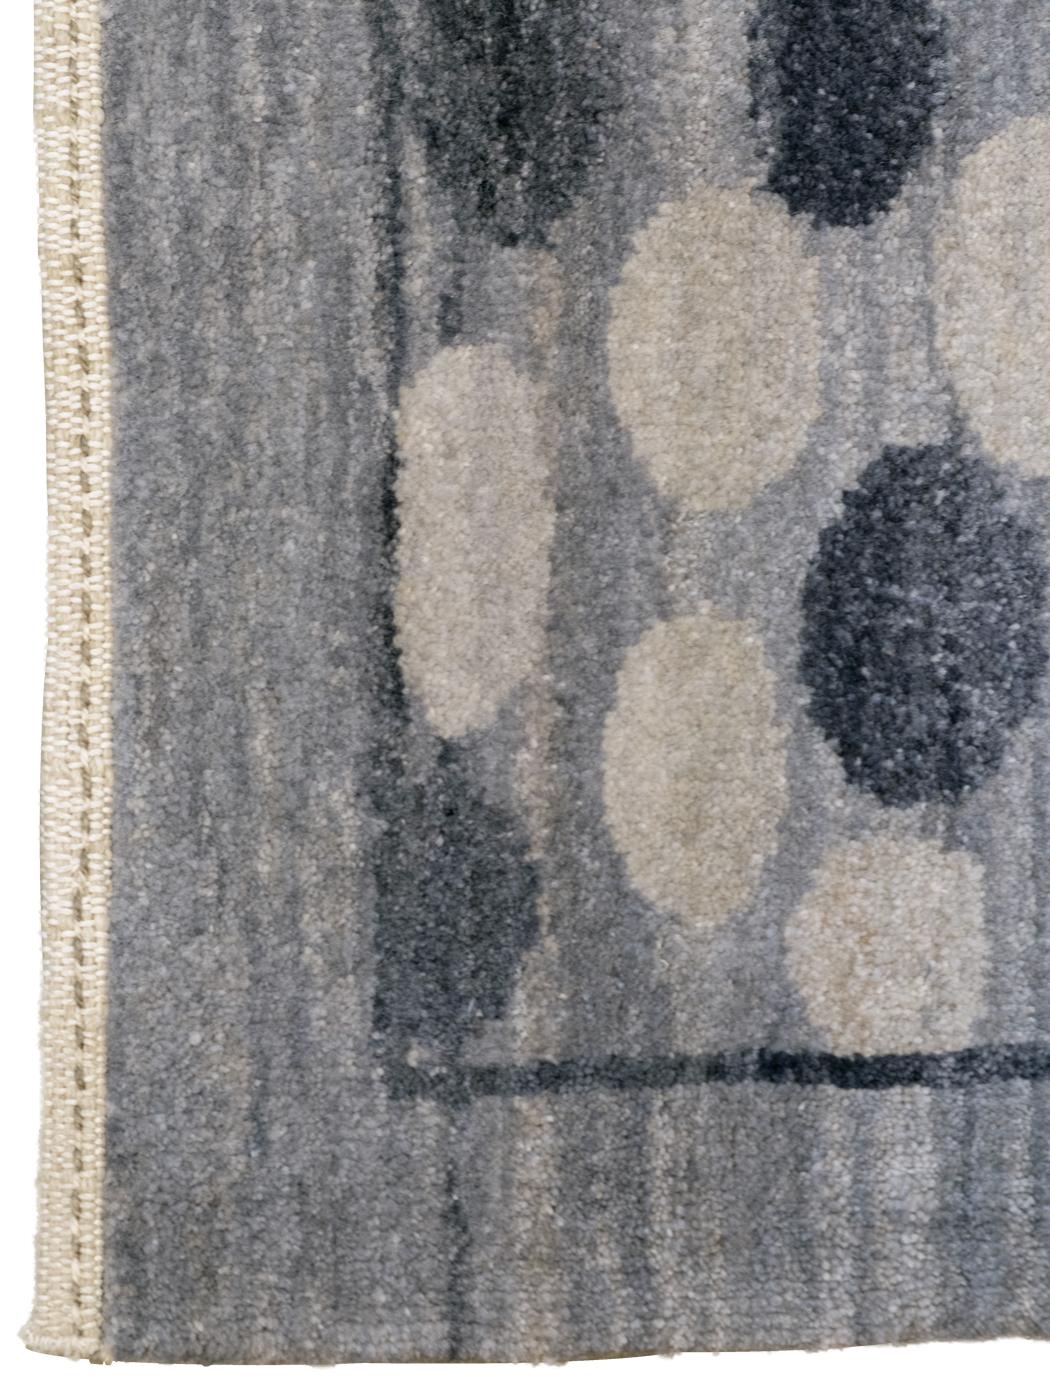 Wool Orley Shabahang Signature “Badu” Gray on Grey Contemporary Persian Carpet For Sale